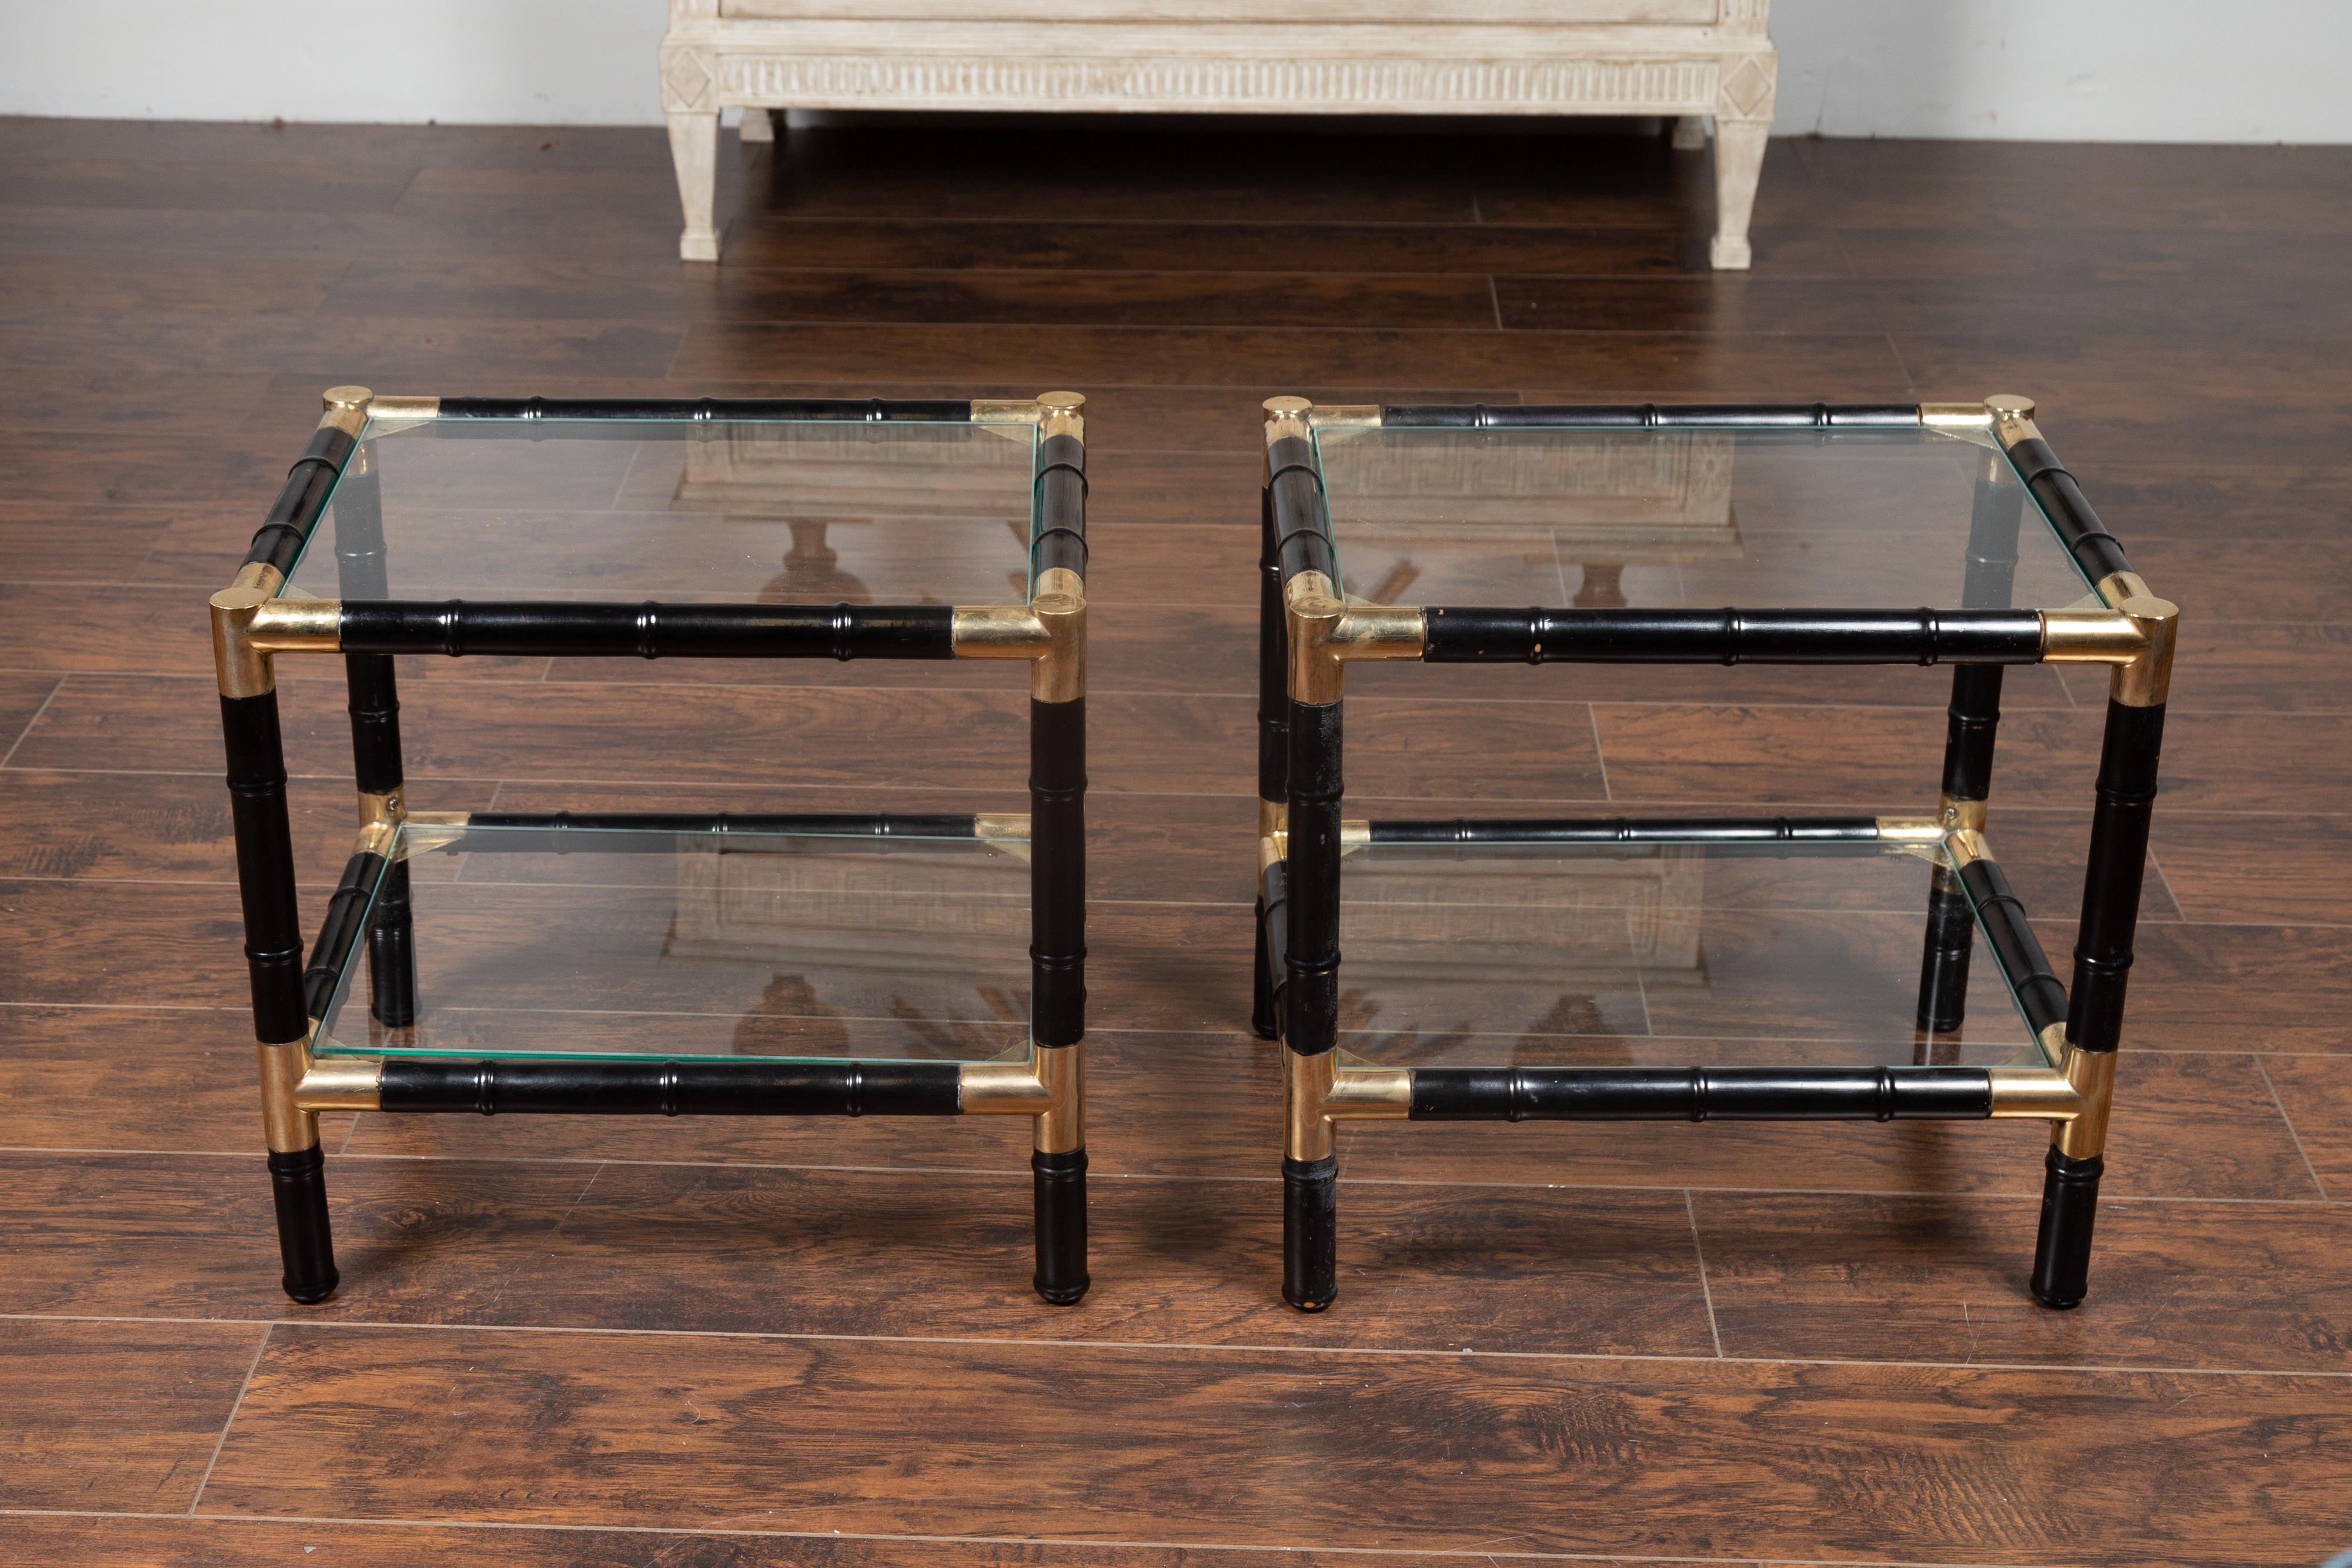 A pair of French vintage ebonized faux bamboo tiered side tables from the mid-20th century, with glass shelves and brass accents. Born in France during the midcentury period, each of this pair of side tables charms us with its contrasting colors and